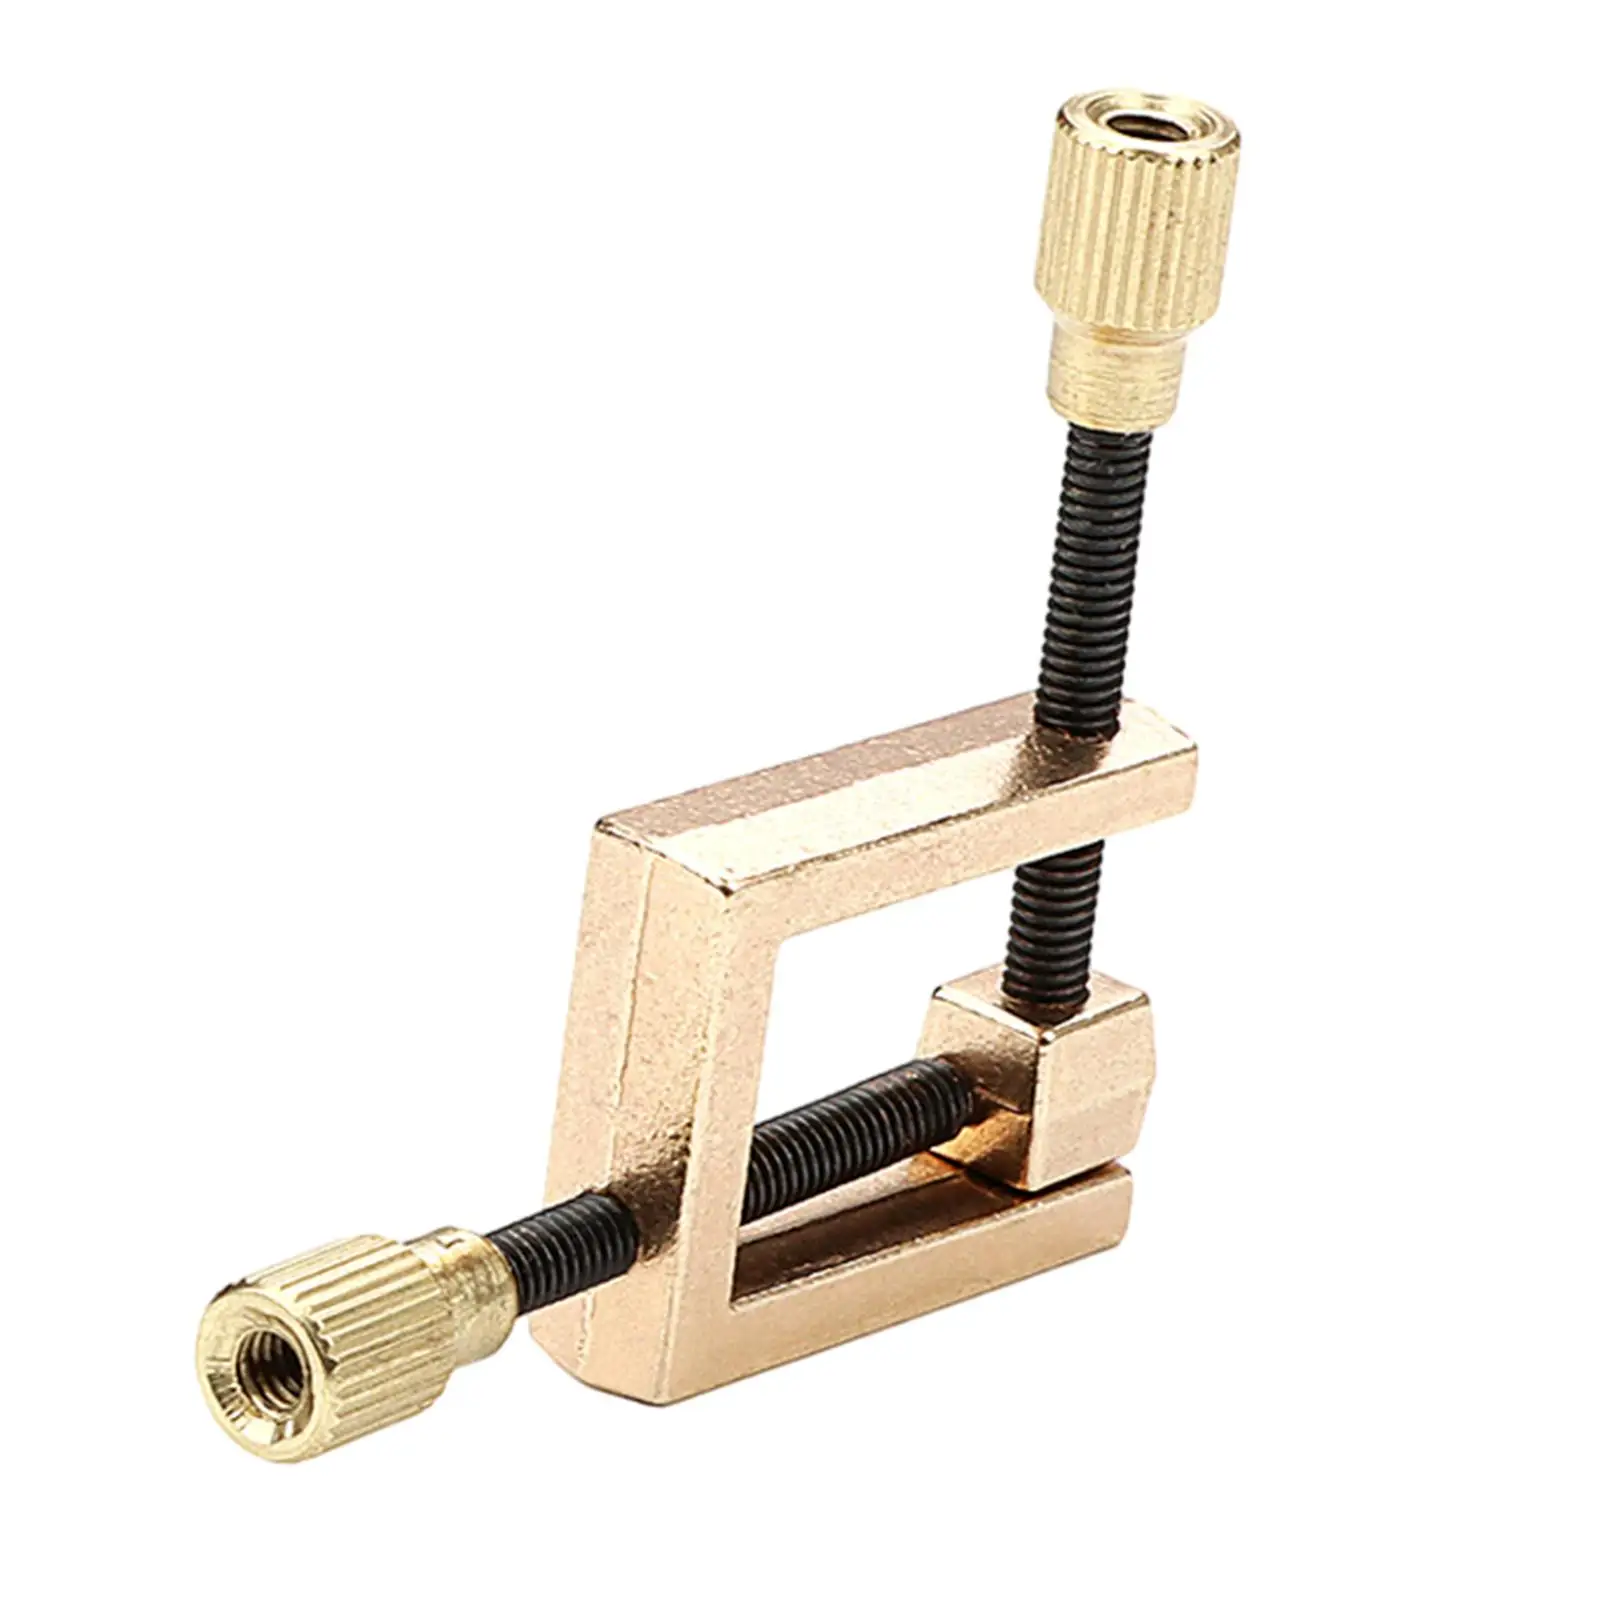 Violin Edge Clamp Tool Portable Durable Violin Making Tools Luthier Tool for Luthier Violin Maker Violinist Accessories Fix Tool